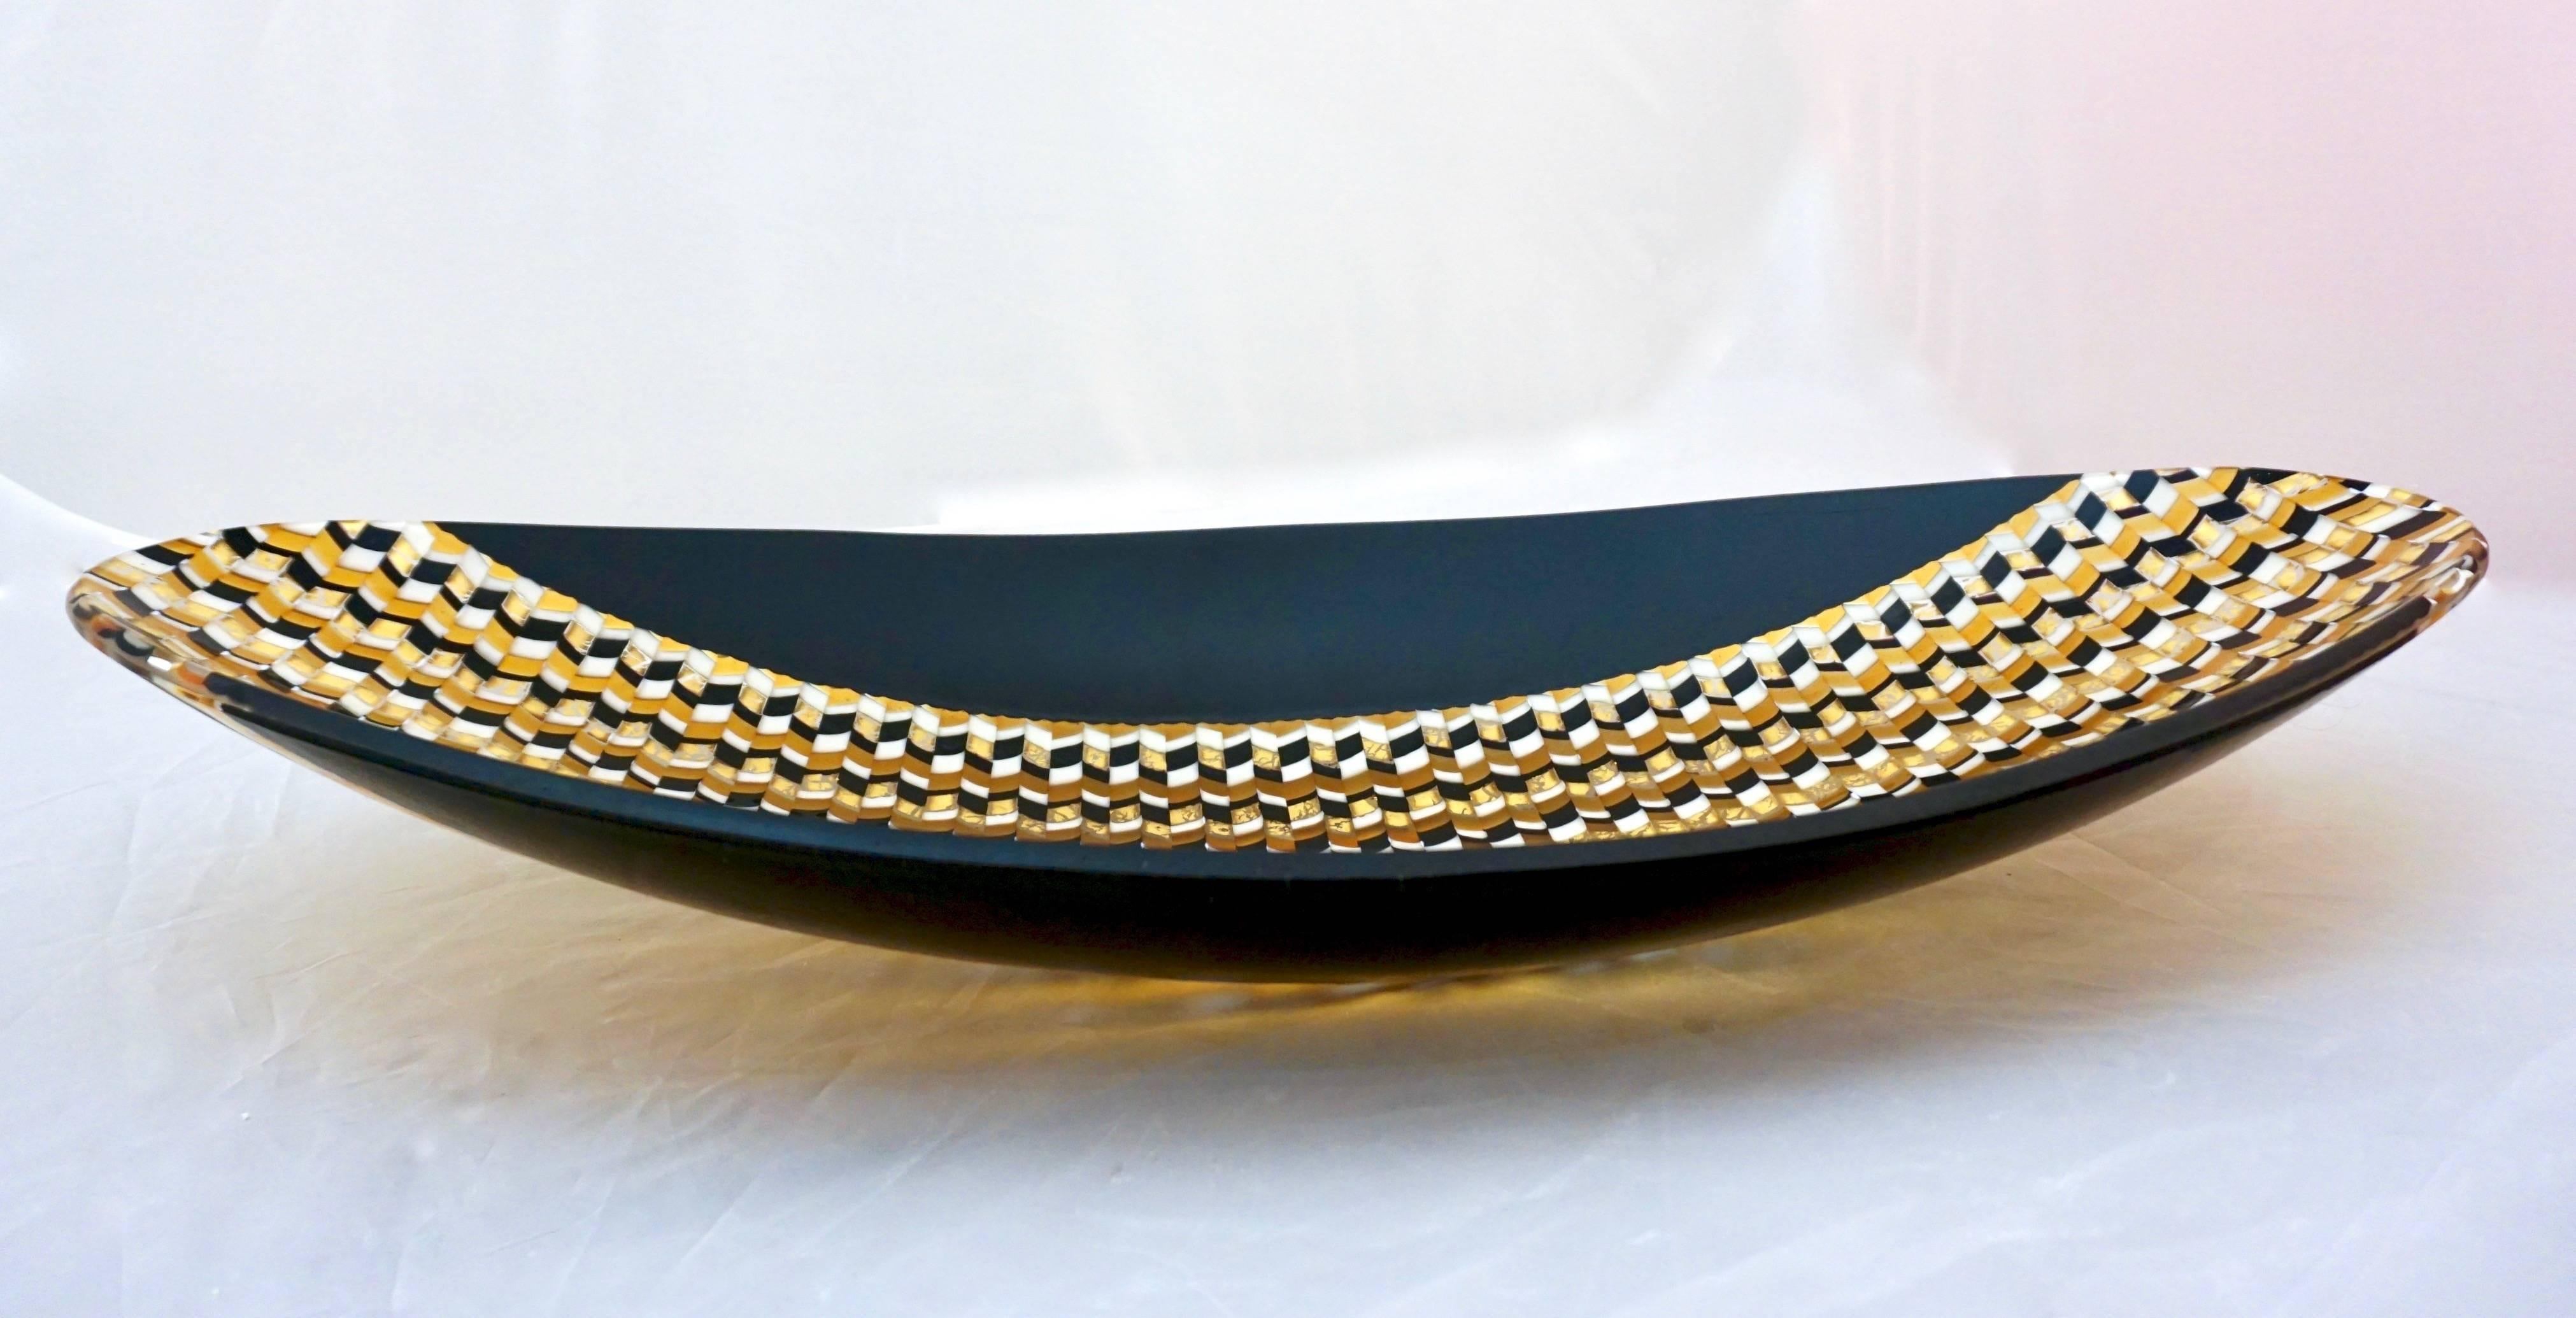 Contemporary Art Deco design black and gold Murano glass centerpiece, with an organic herringbone decor, a pattern inspired by the Venetian Arsenal where the cluster of stockyard roofs present the same geometry, made precious with 24-karat gold,